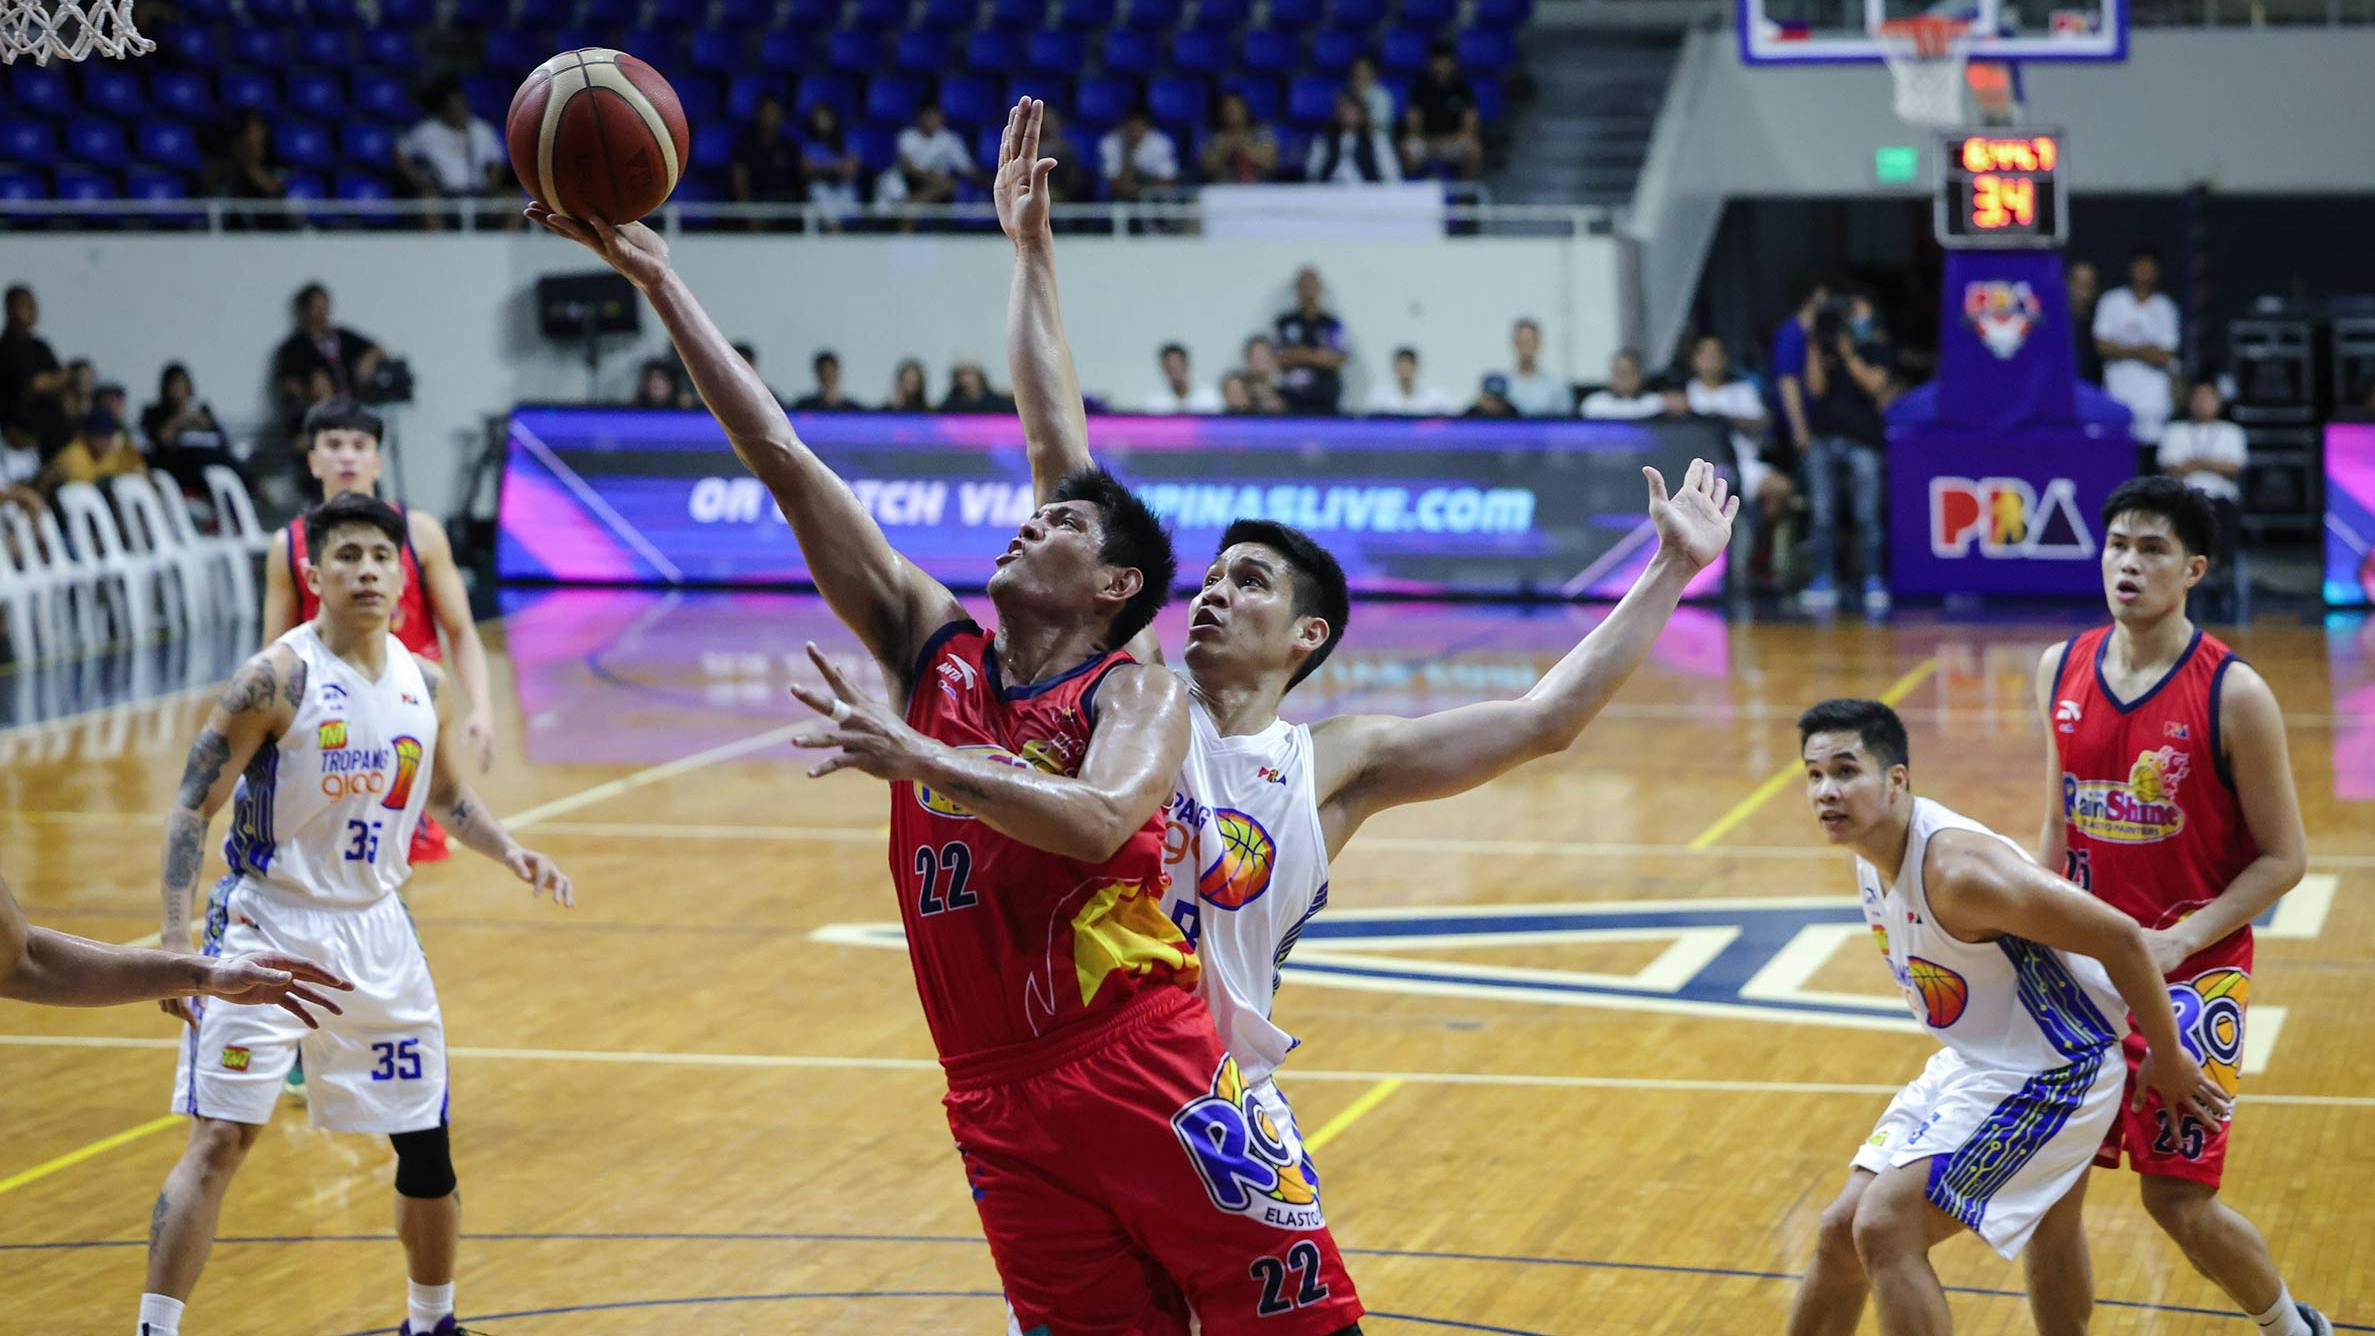 PBA: Jhonard Clarito plays hero as Rain or Shine outlasts TNT, forces rubber match for semis seat